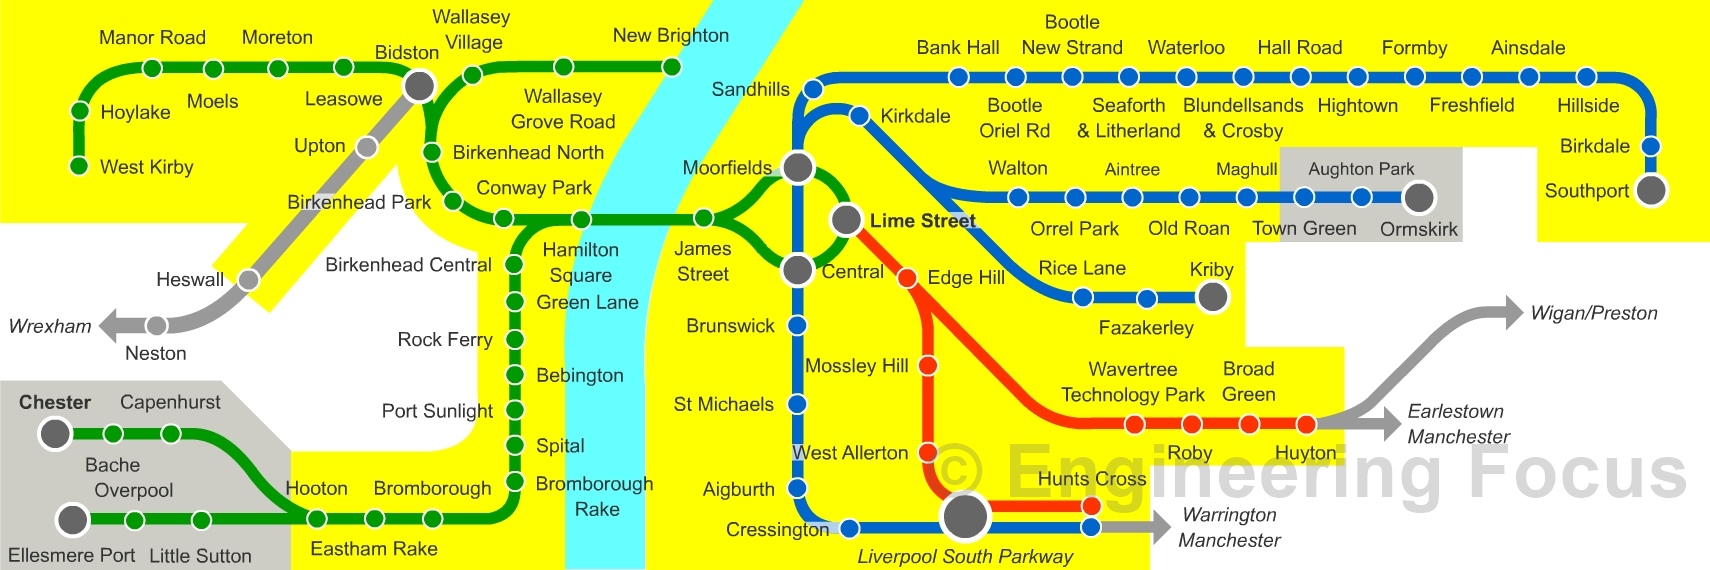 Merseyrail network map, designed to fit within on-train advertising space